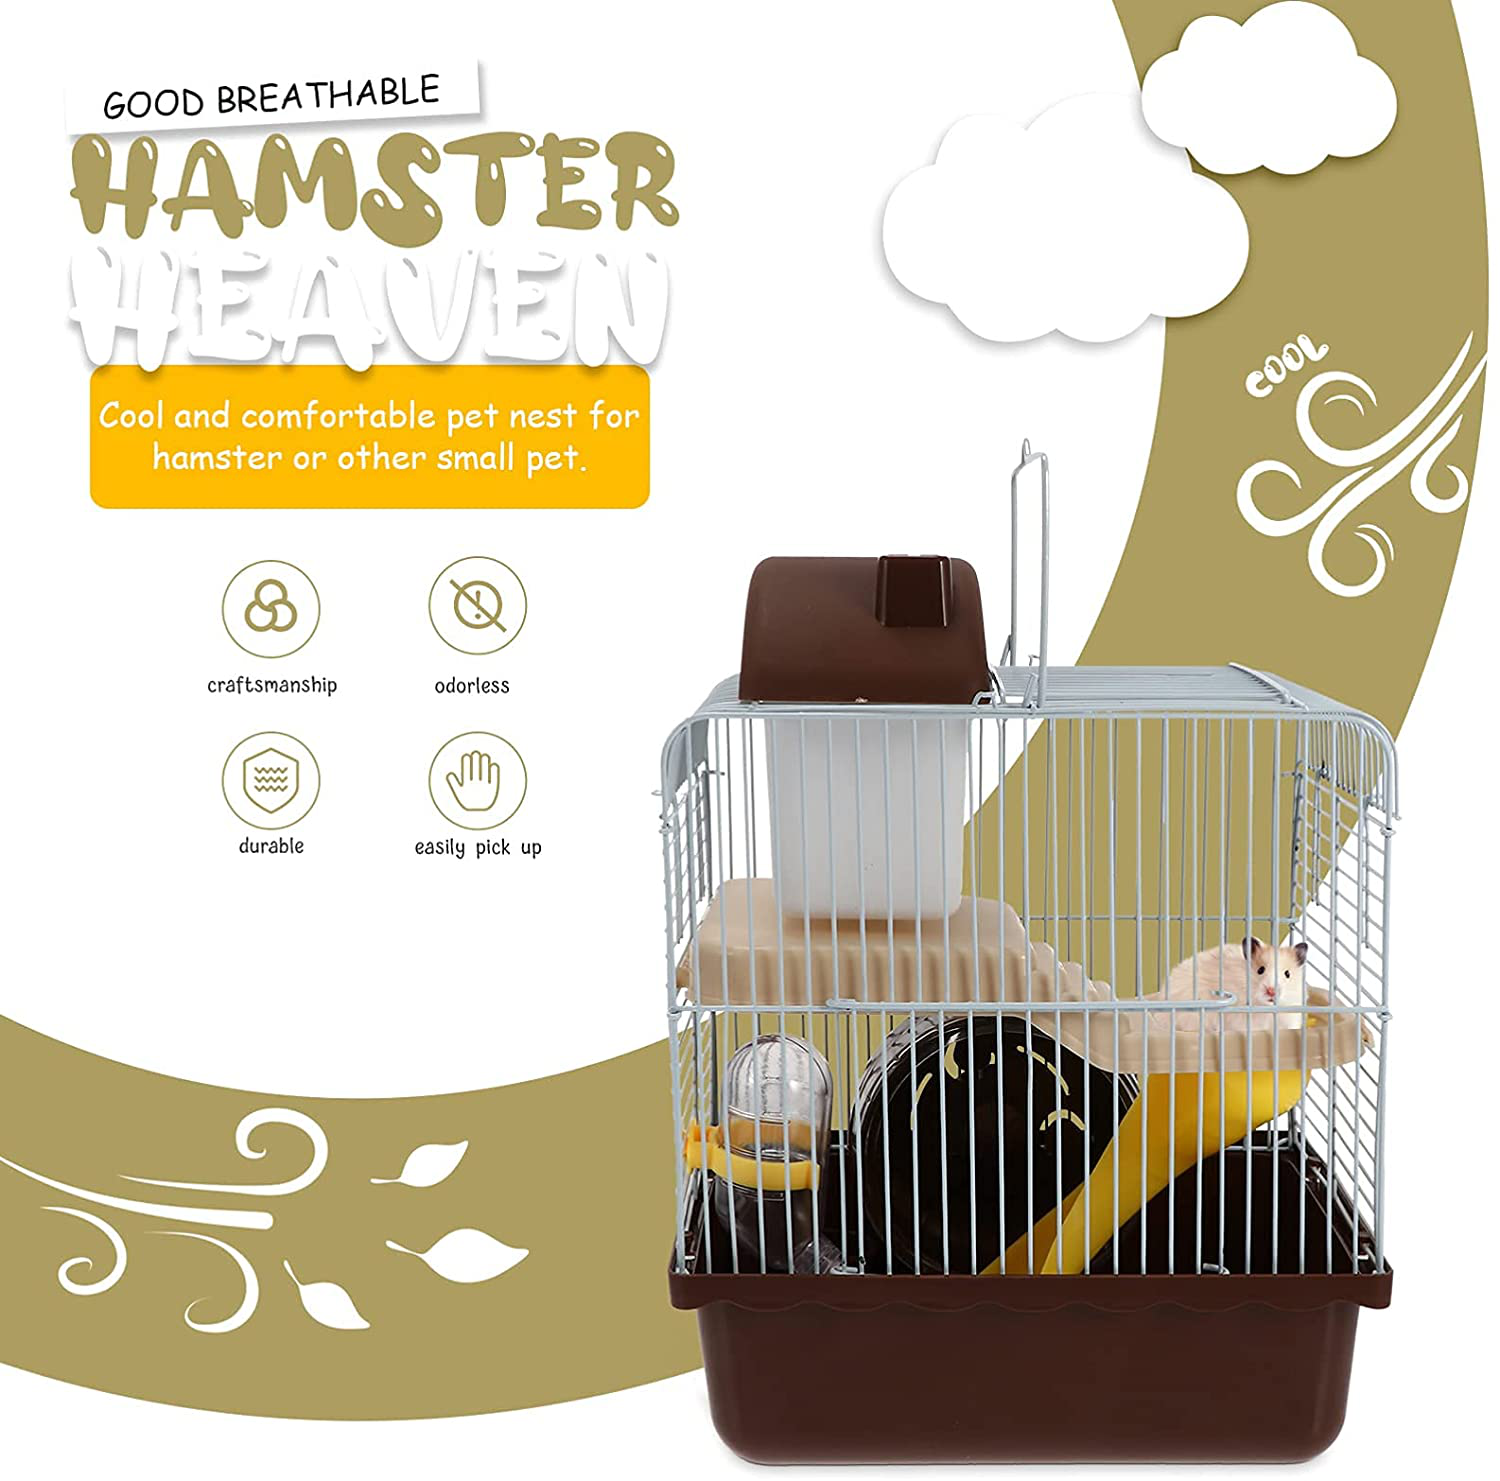 STOBOK Hamster Cage Portable Double Layer Wire Habitat Small Animal Critter House Cage Pet Playpen Activity Exercise Centre for Rodent Gerbil Mouse Mice Rat Accessories Coffee